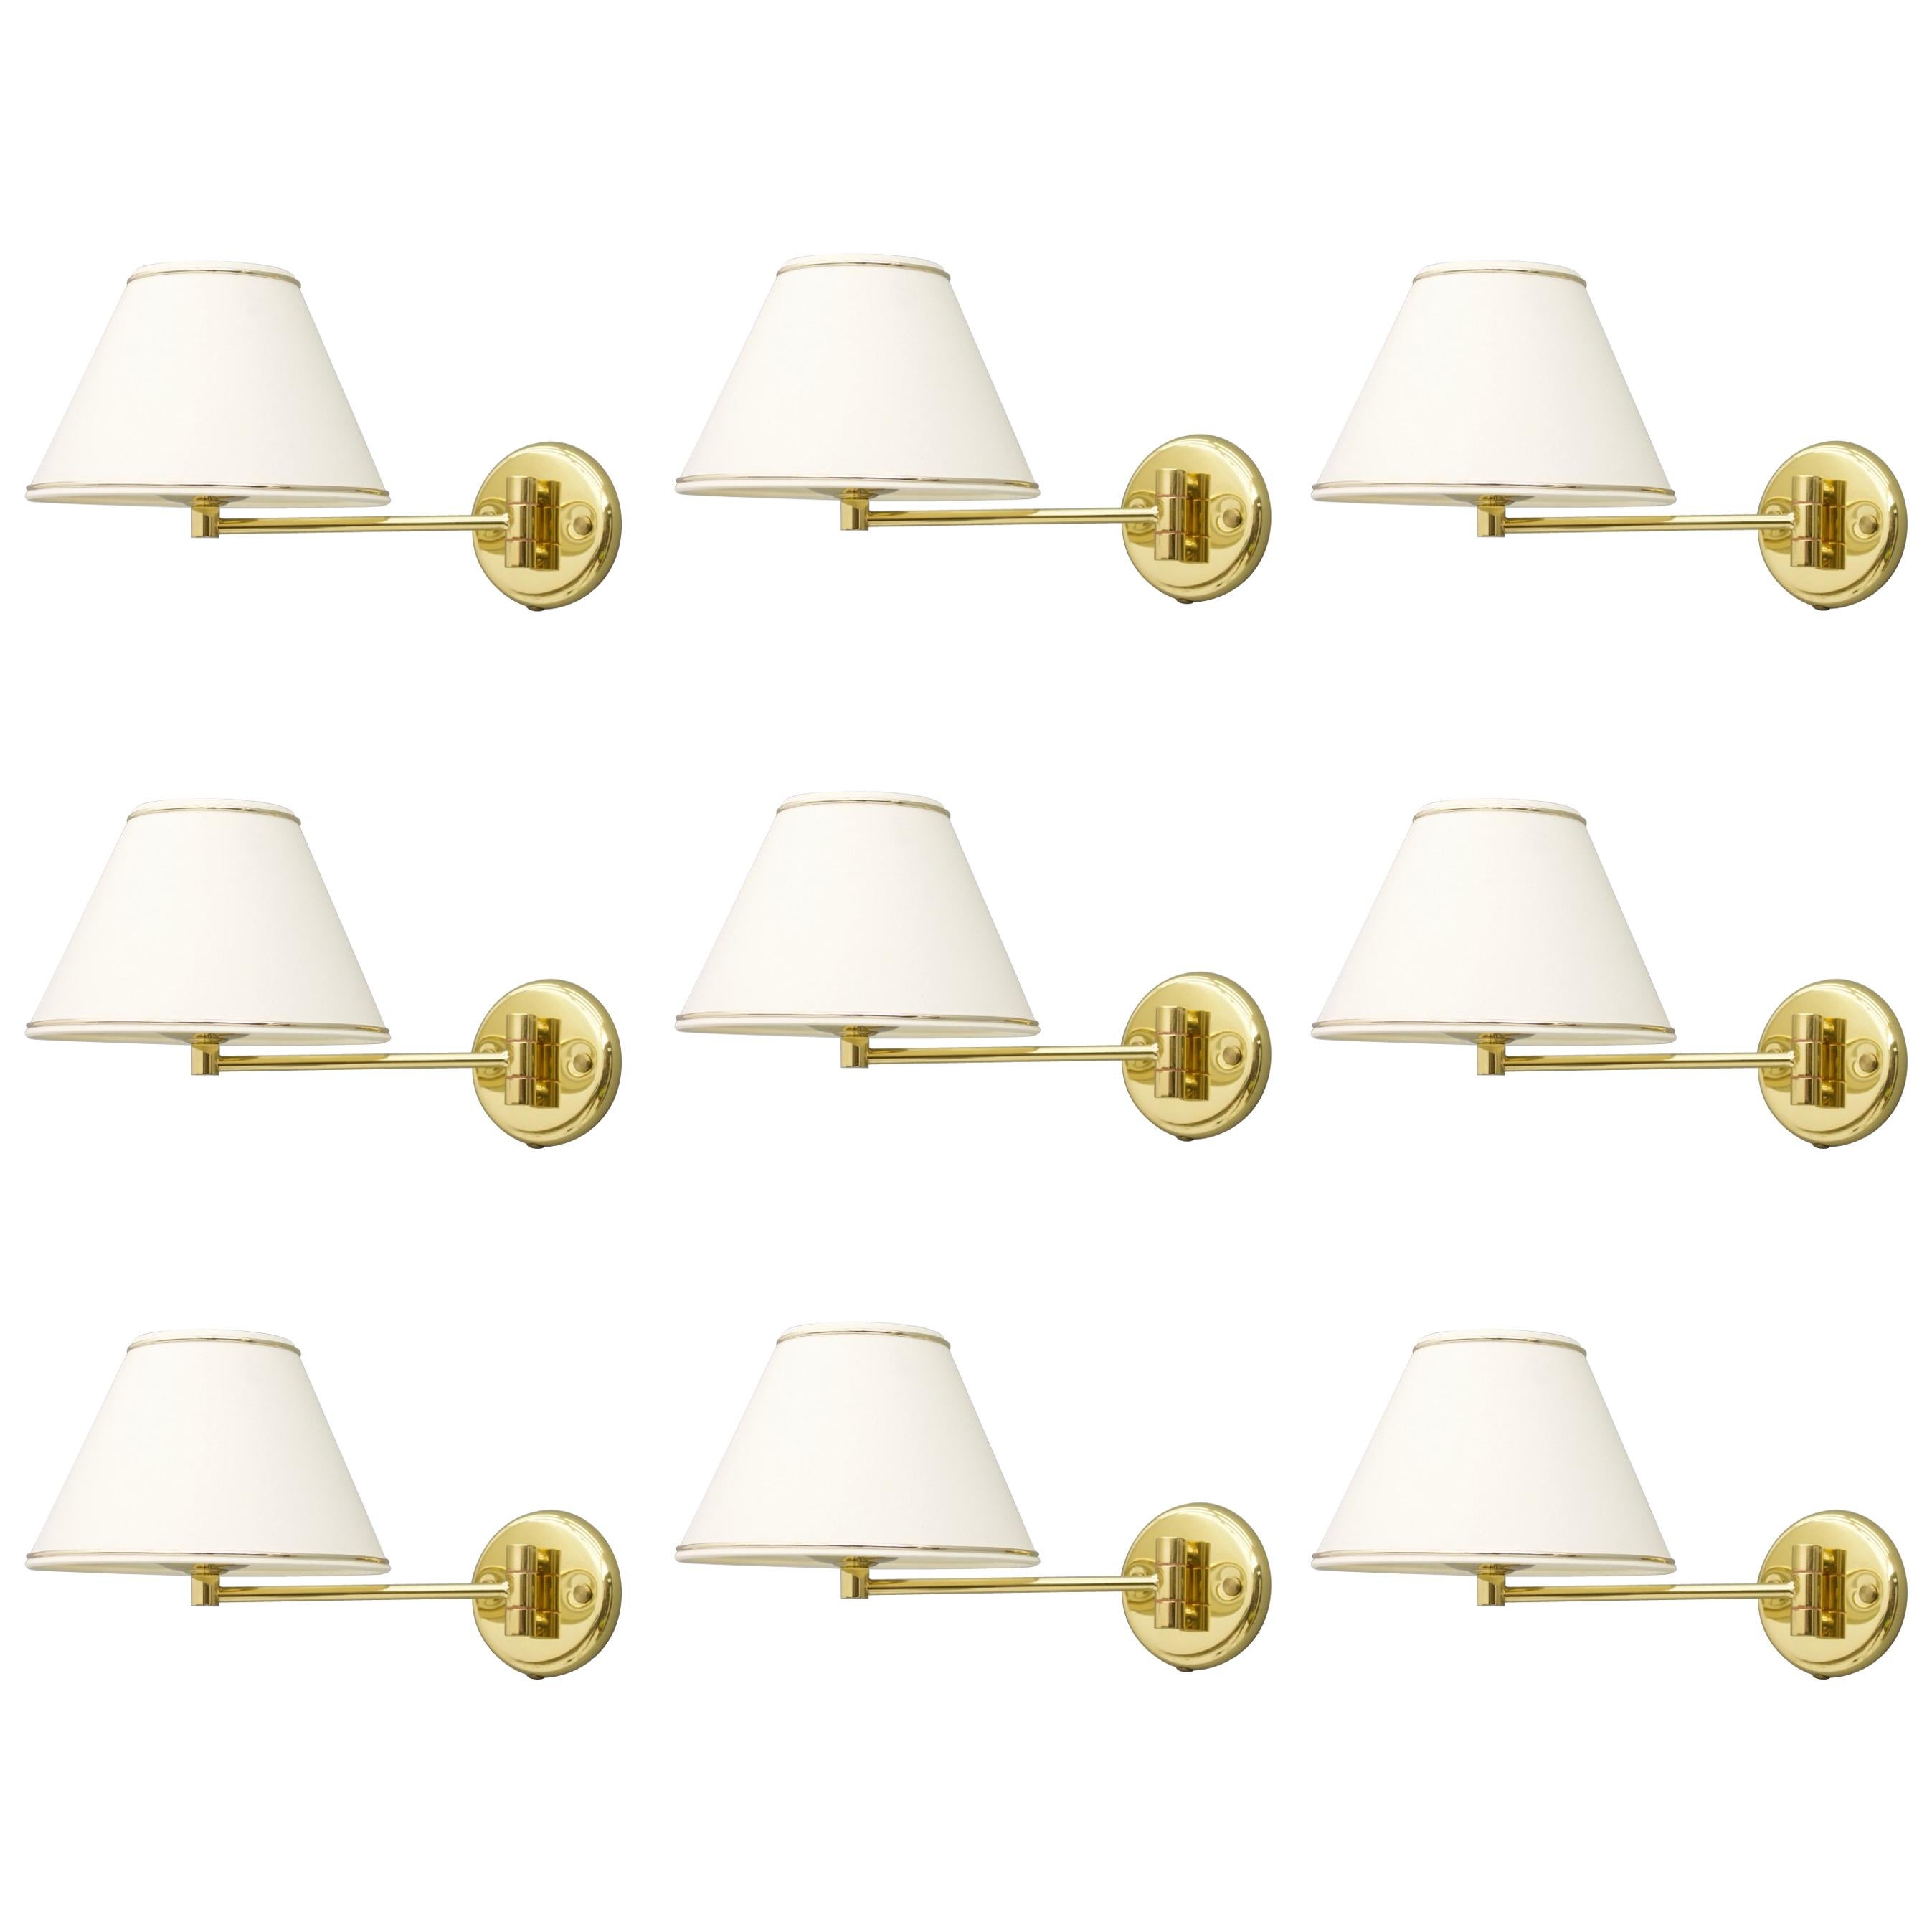 Midcentury Brass Wall Lights 1970s For Sale